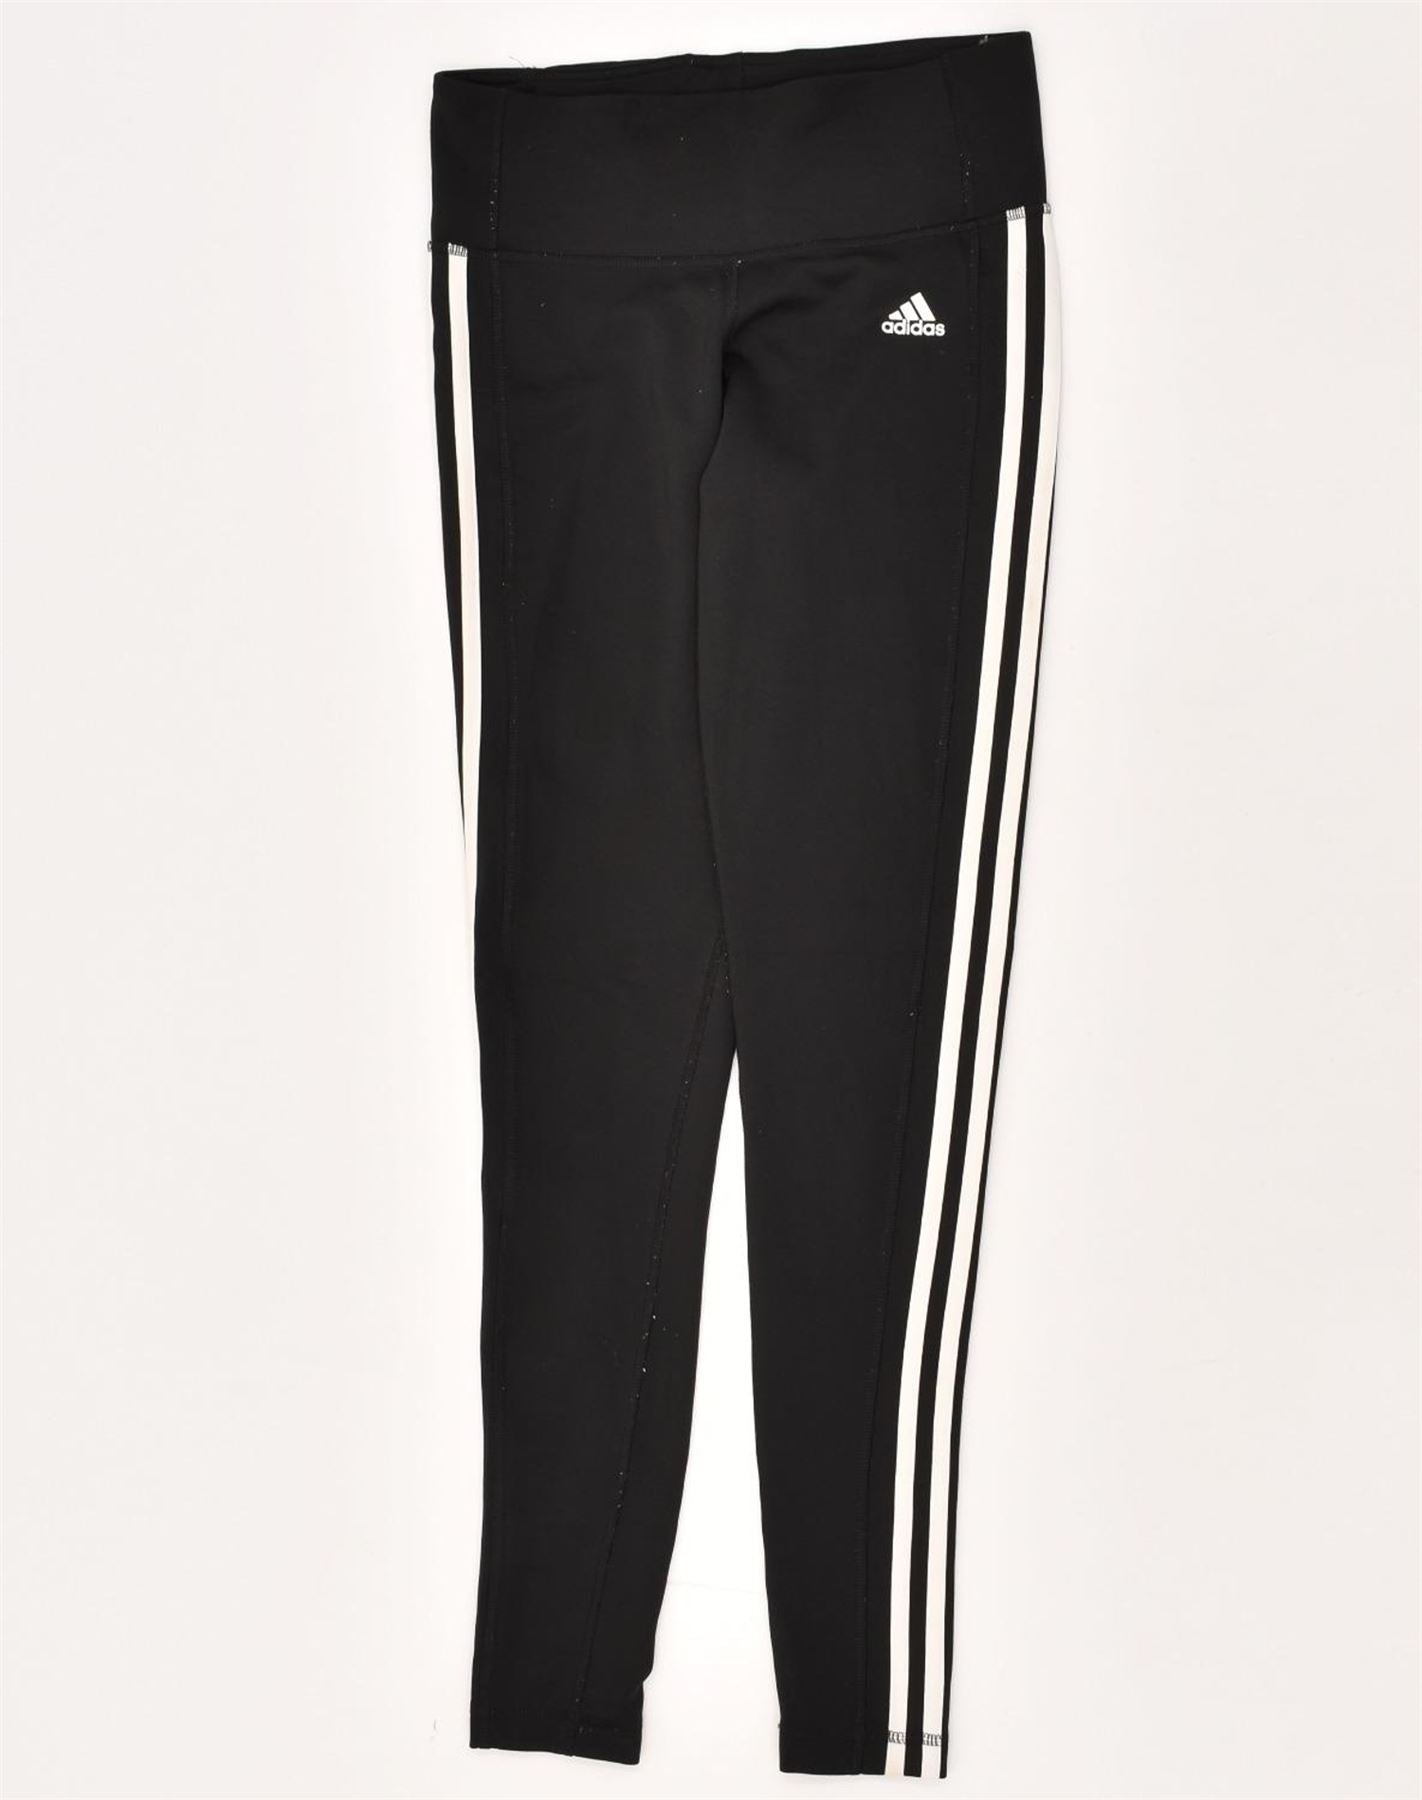 ADIDAS Womens Climalite Leggings UK 8-10 Small Black Polyester, Vintage &  Second-Hand Clothing Online